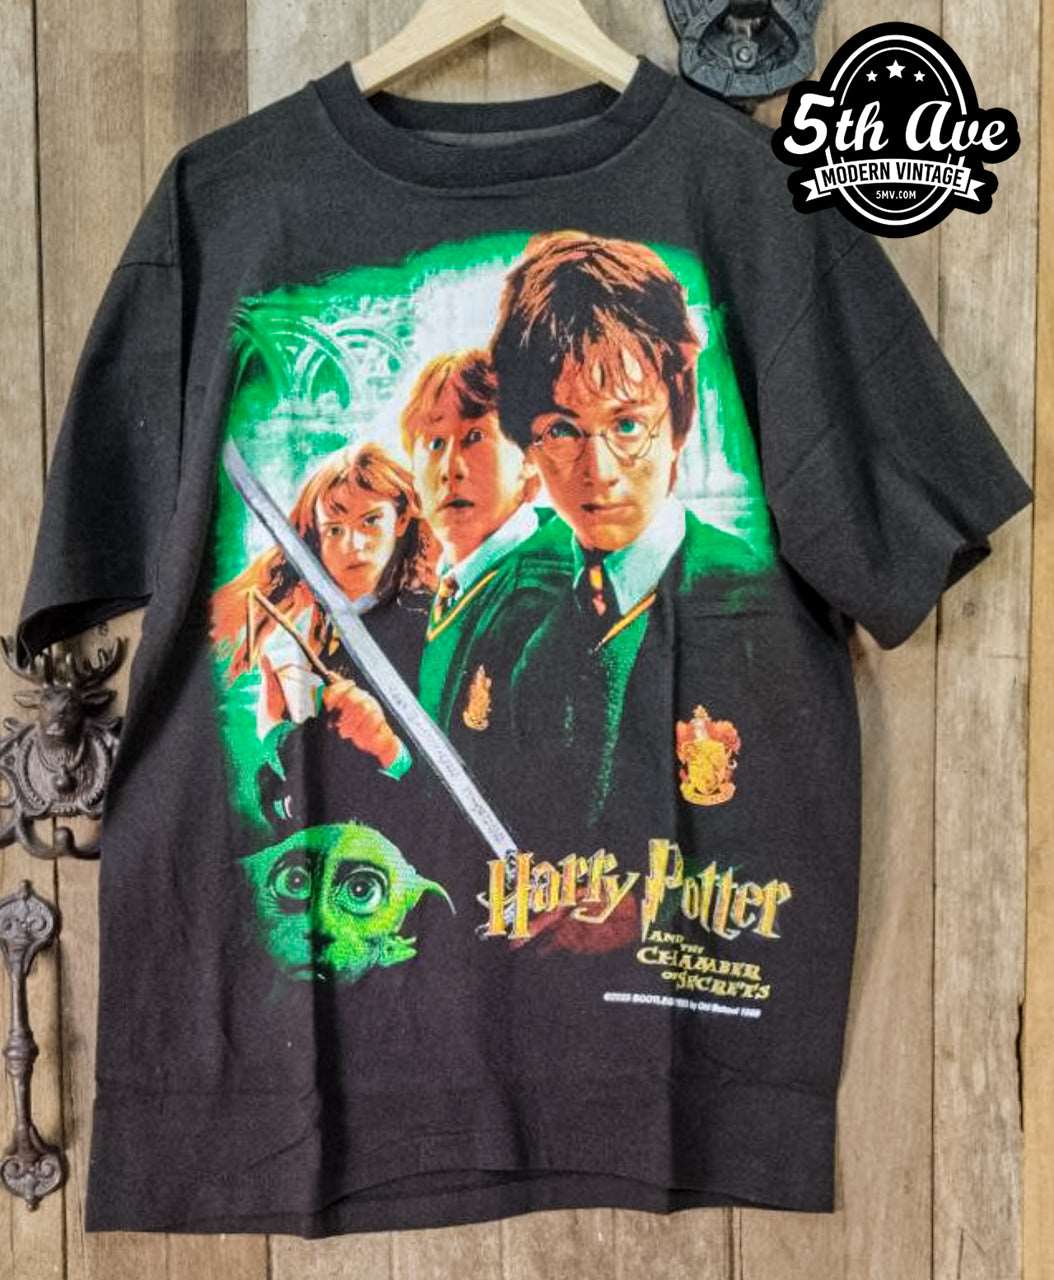 Harry Potter and the Chamber of Secrets - New Vintage Movie T shirt